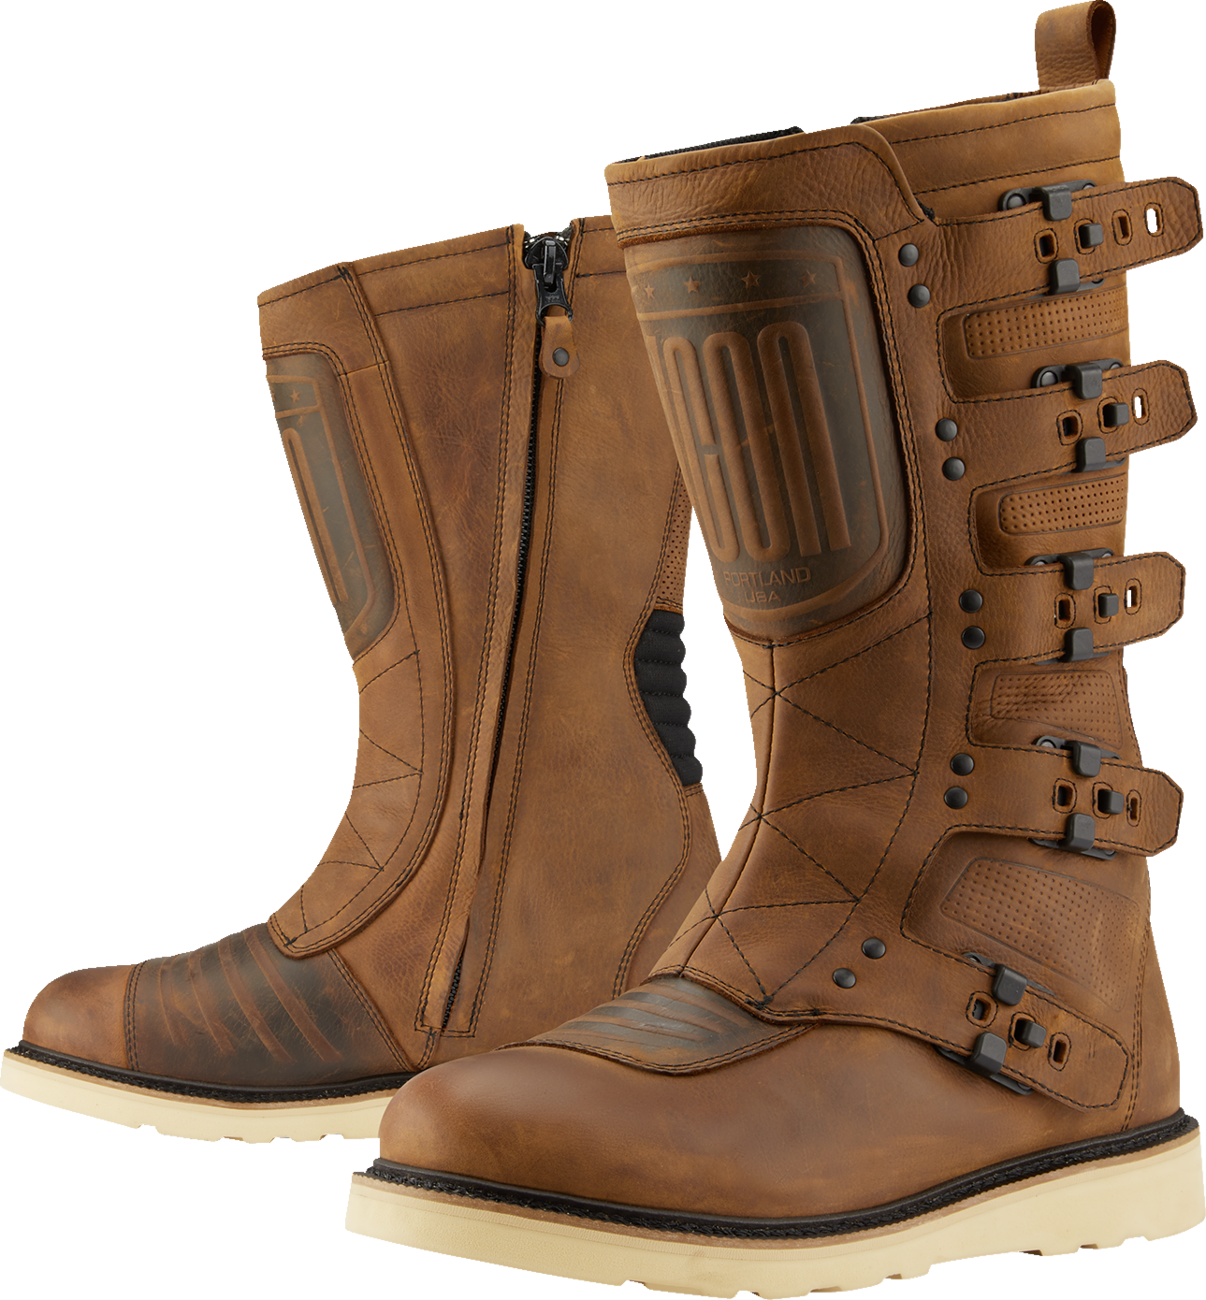 ICON Elsinore 2™ CE Boots - Brown - Size 13 3403-1230